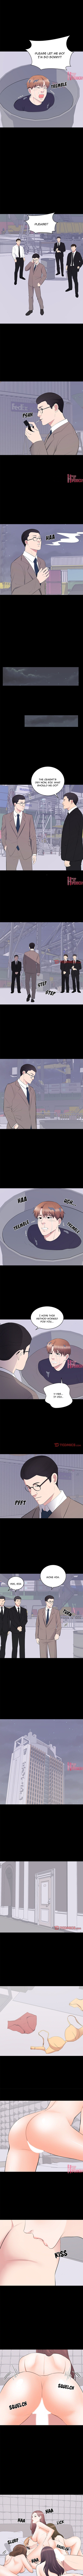 A Cinderella Story - Chapter 17 Page 2